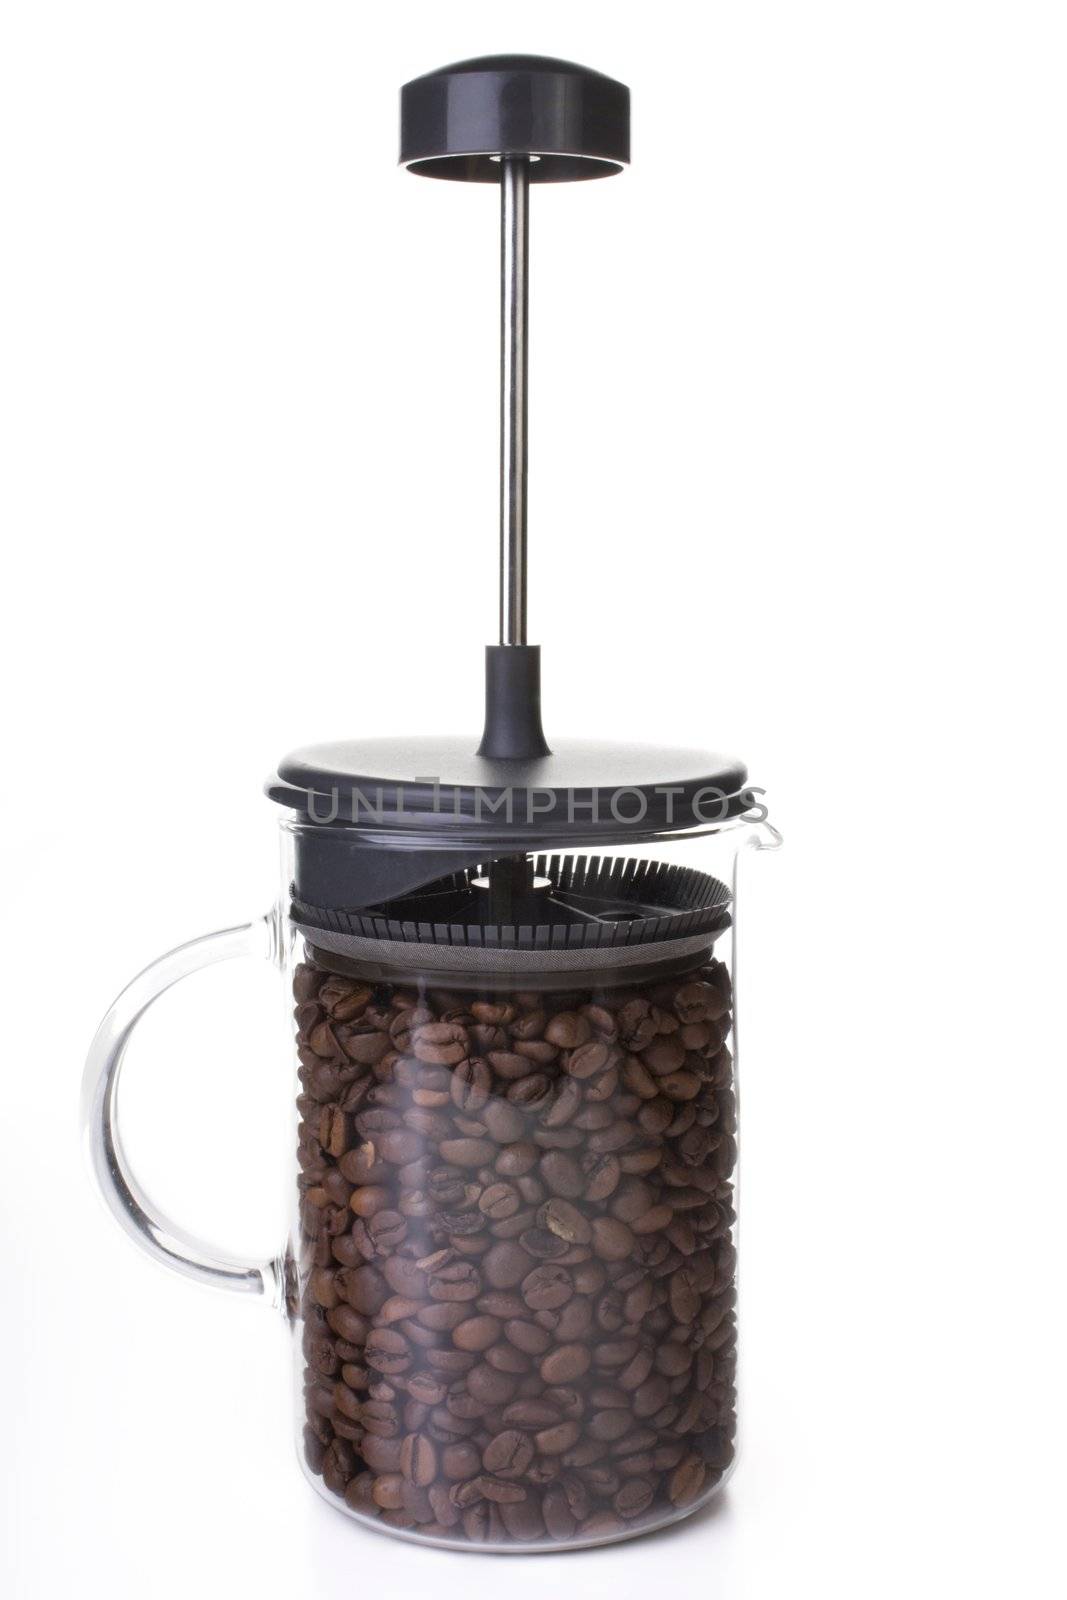 French Press with Coffee Beans by charlotteLake